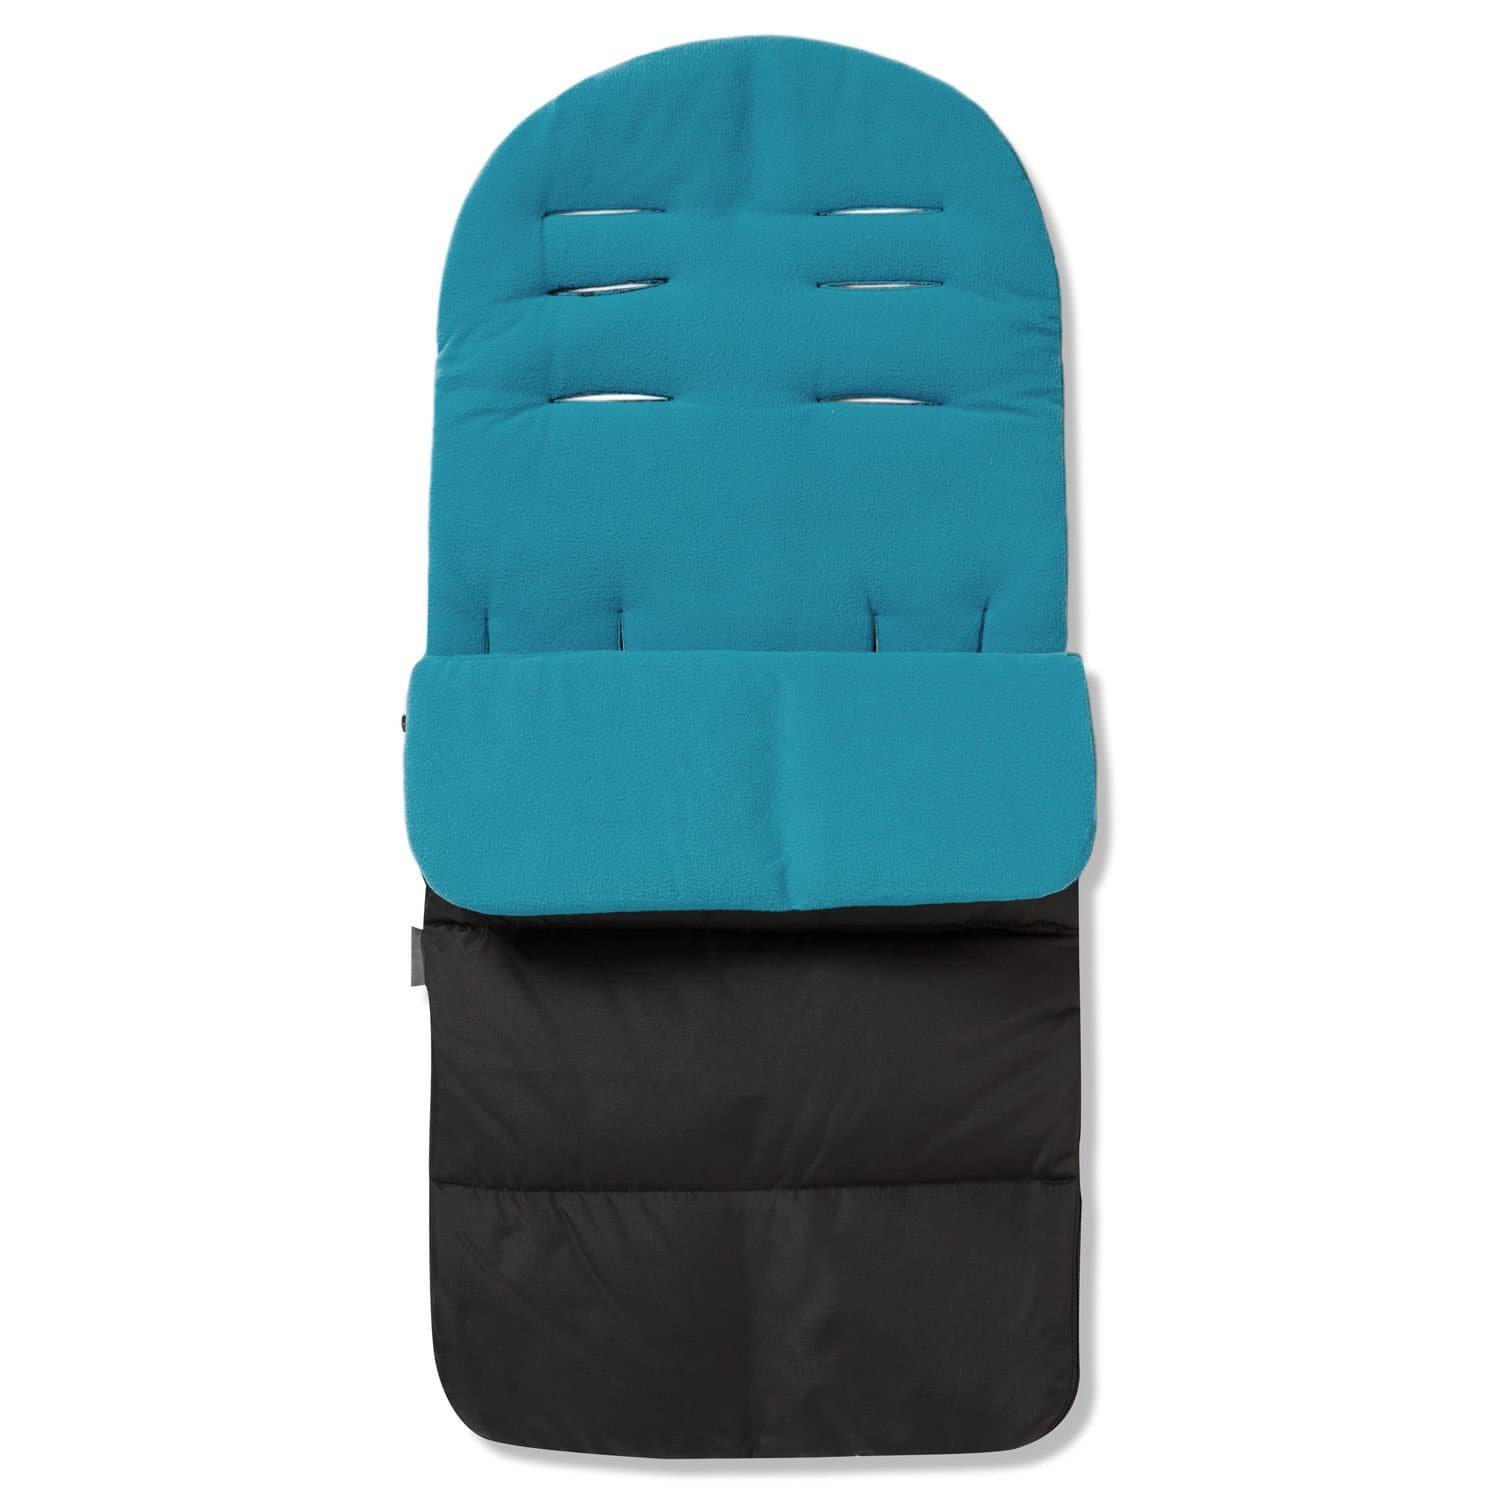 Premium Footmuff / Cosy Toes Compatible with Bebecar - For Your Little One